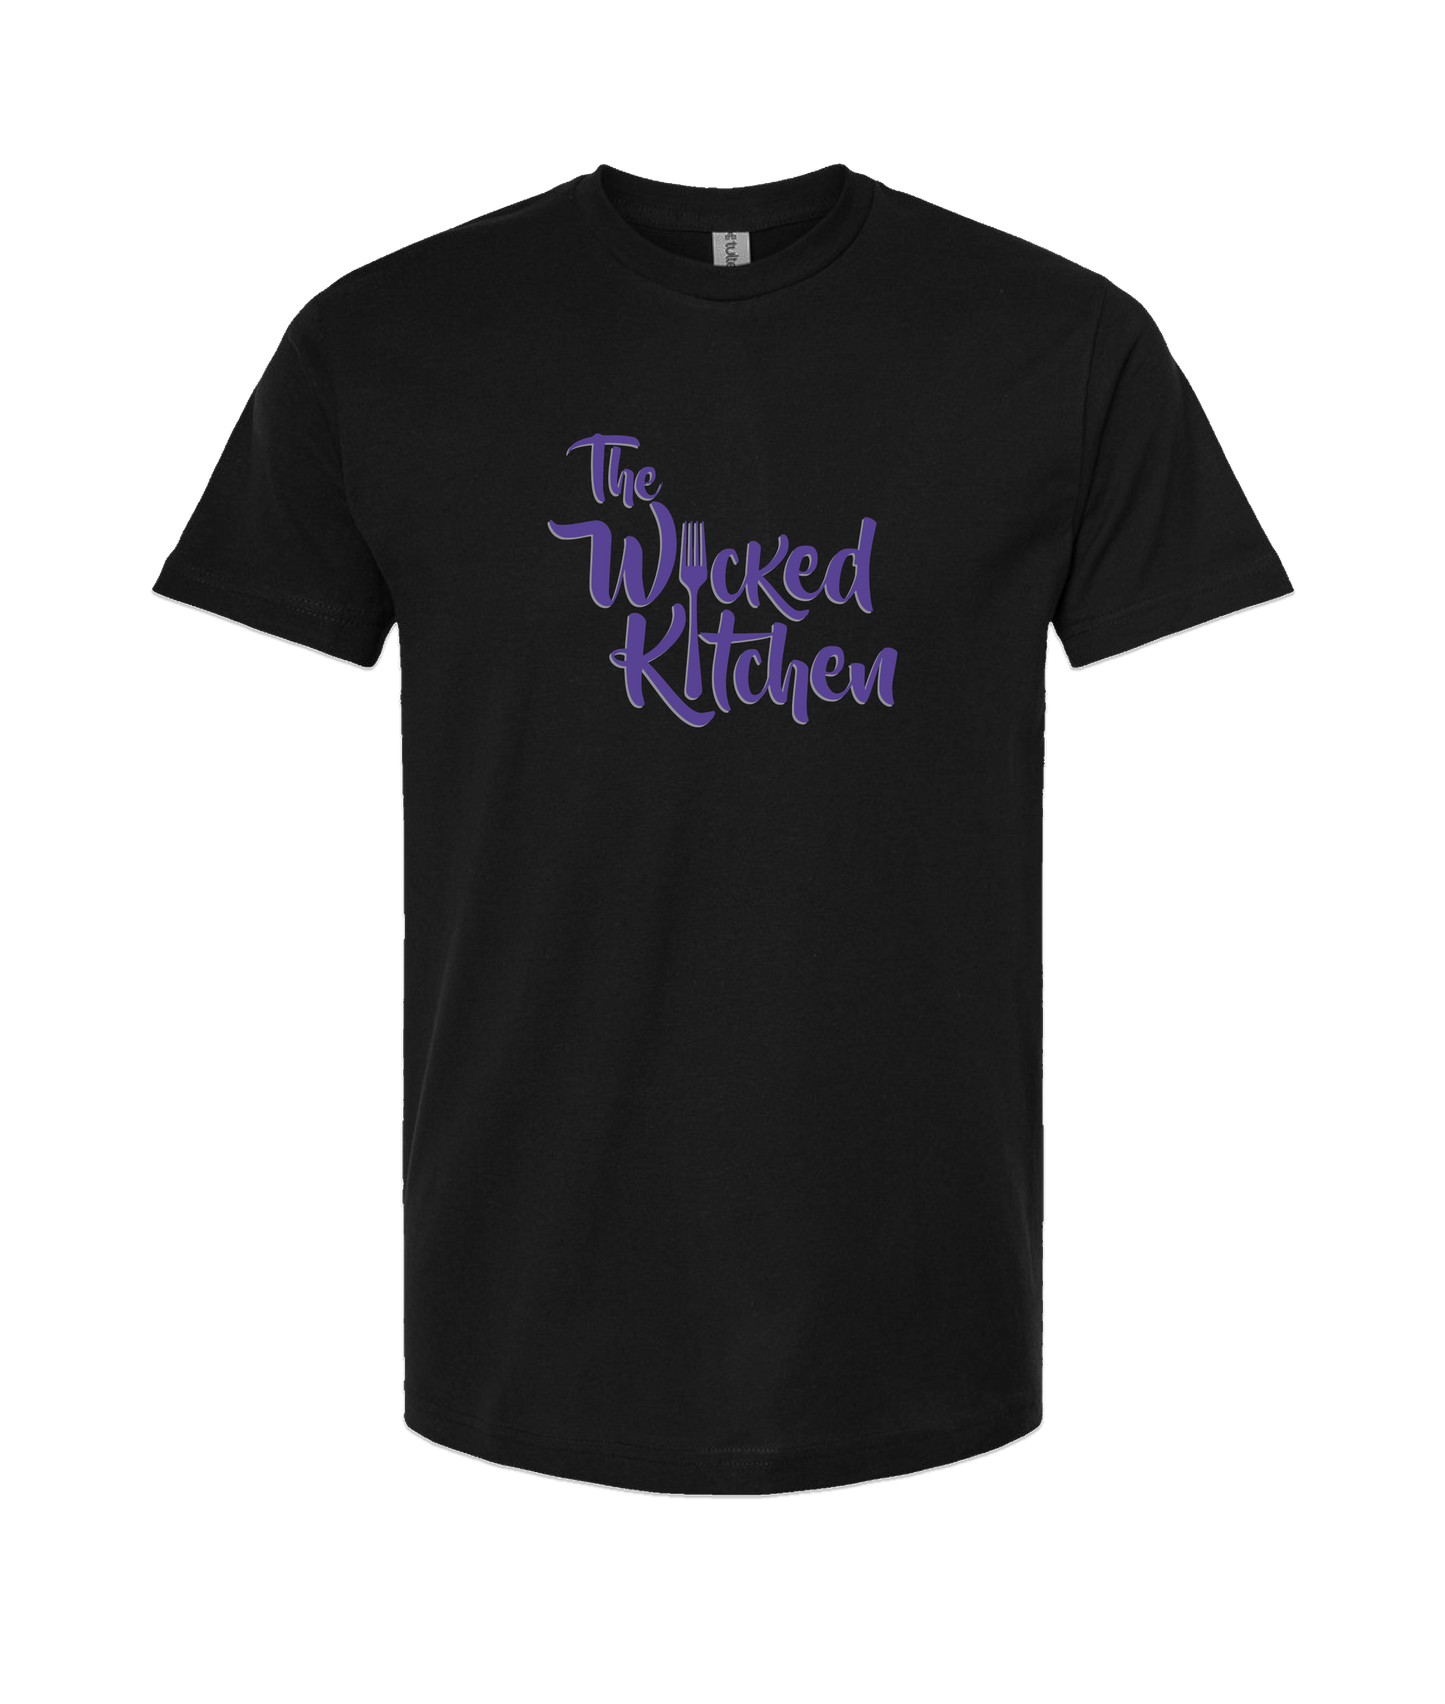 The Wicked Kitchen - 2 Sided Forks - Black T-Shirt